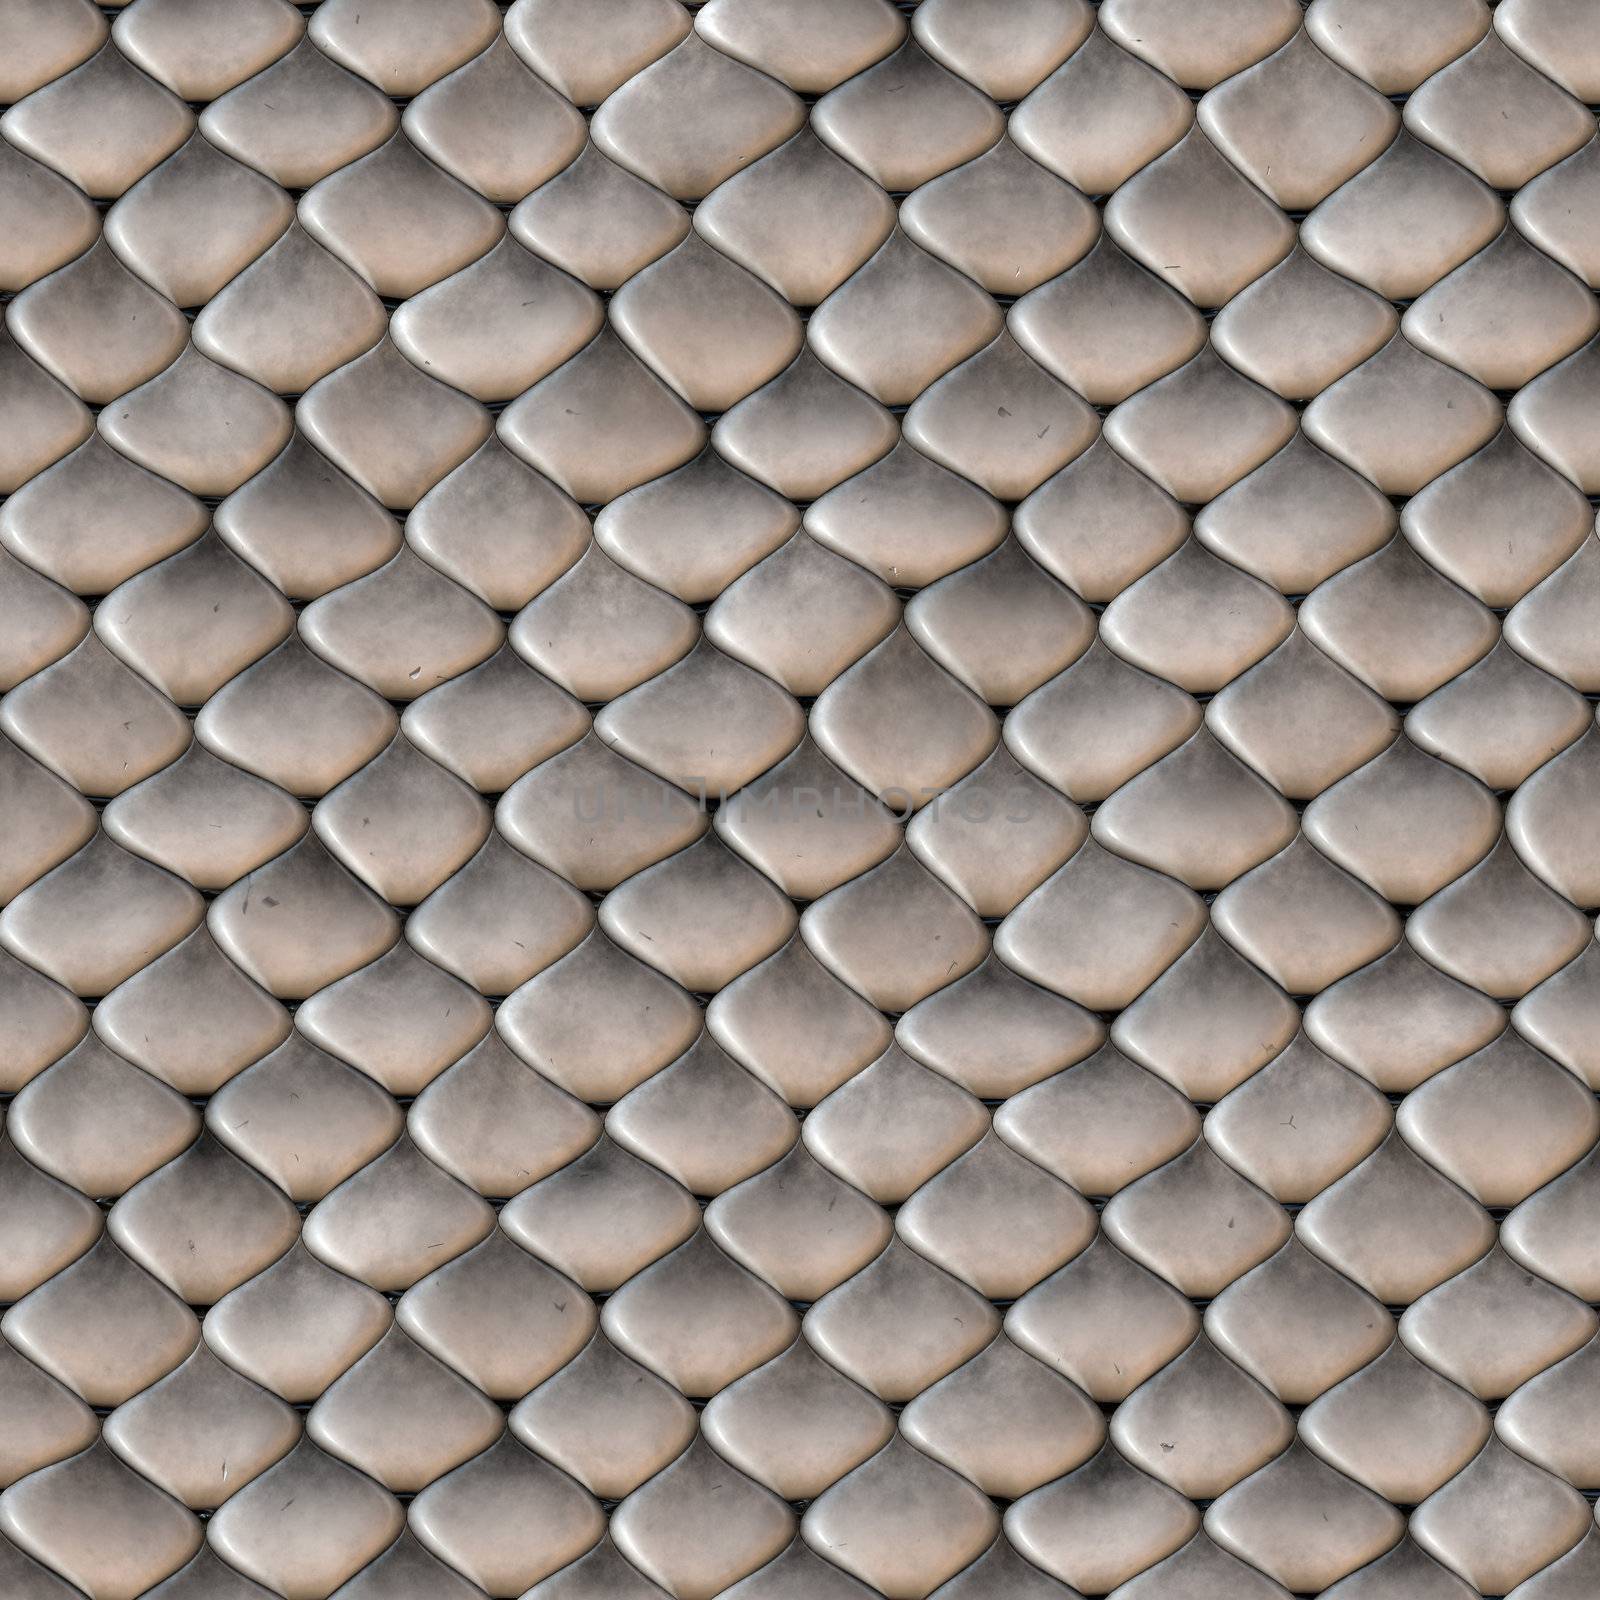 Snake Skin Scales Seamless Texture by graficallyminded